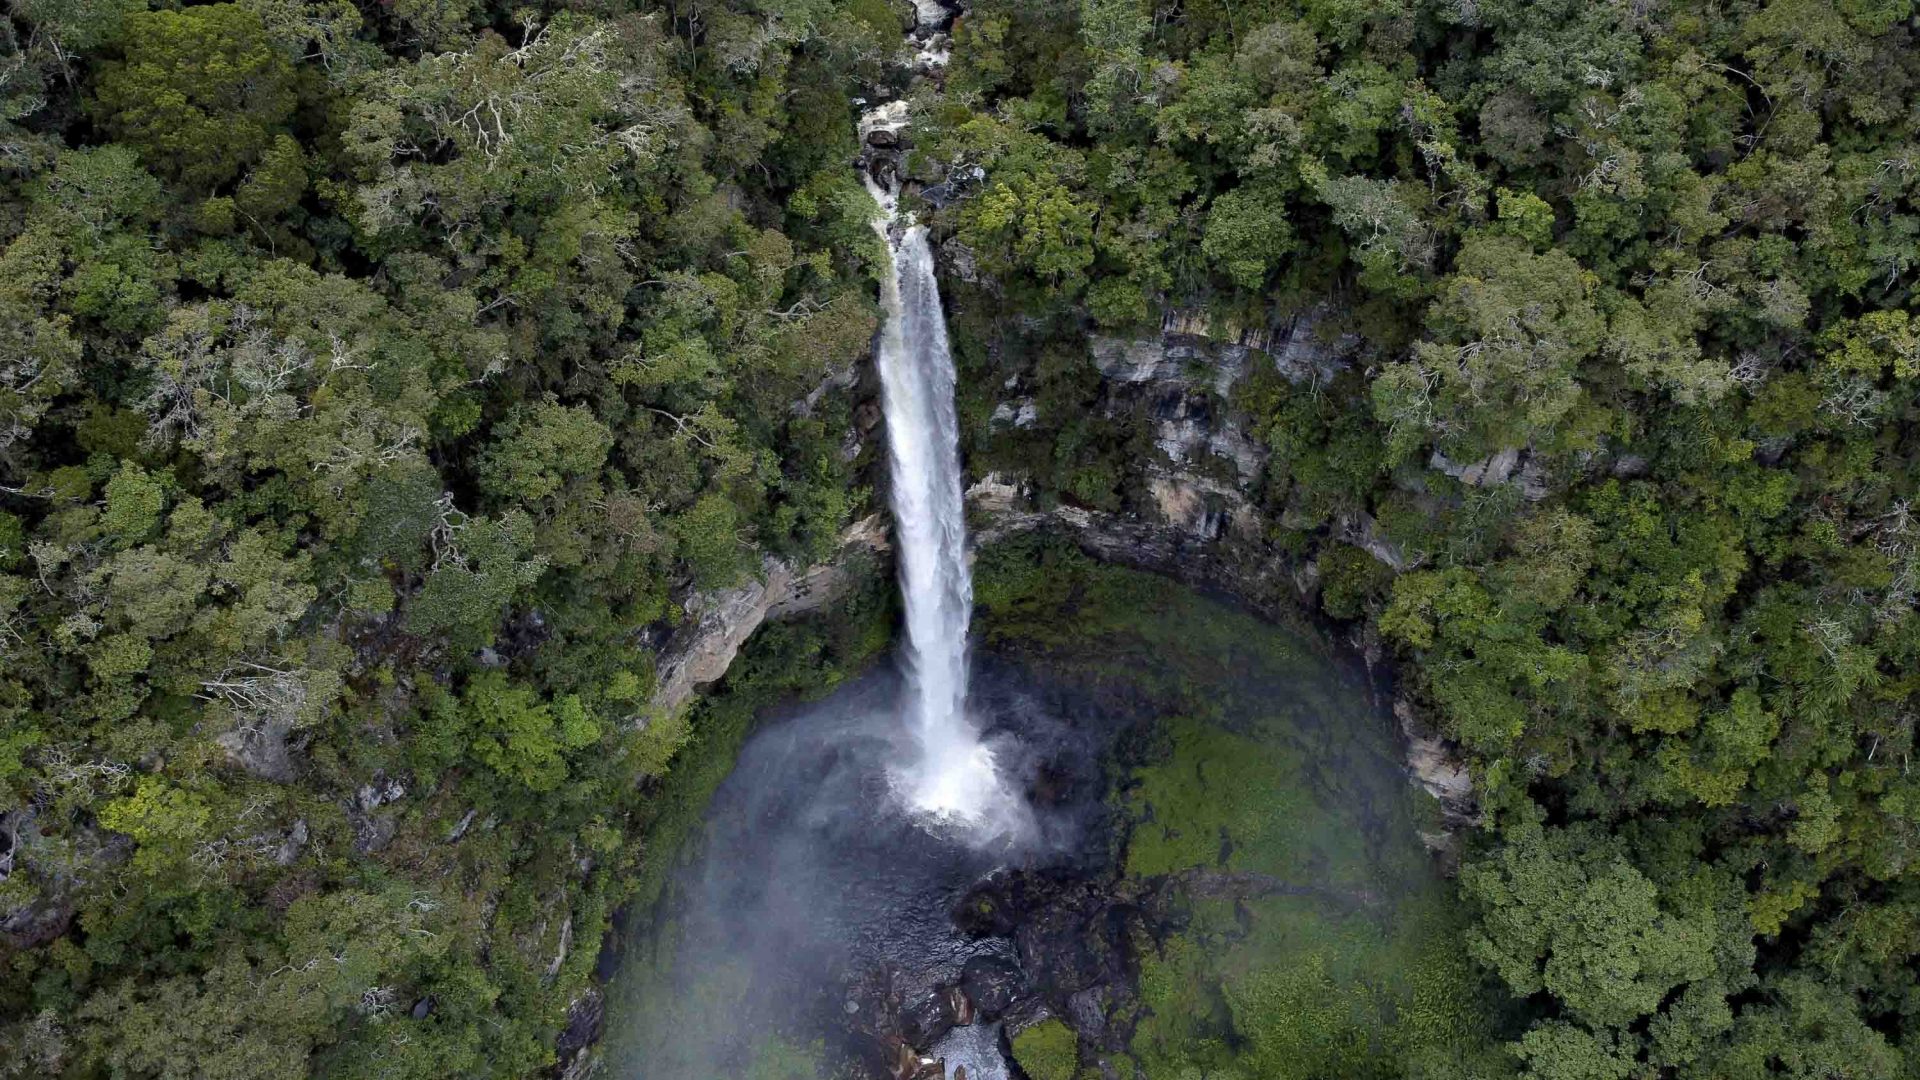 An aerial view of a waterfall surrounded by green trees cascading into a green pool.